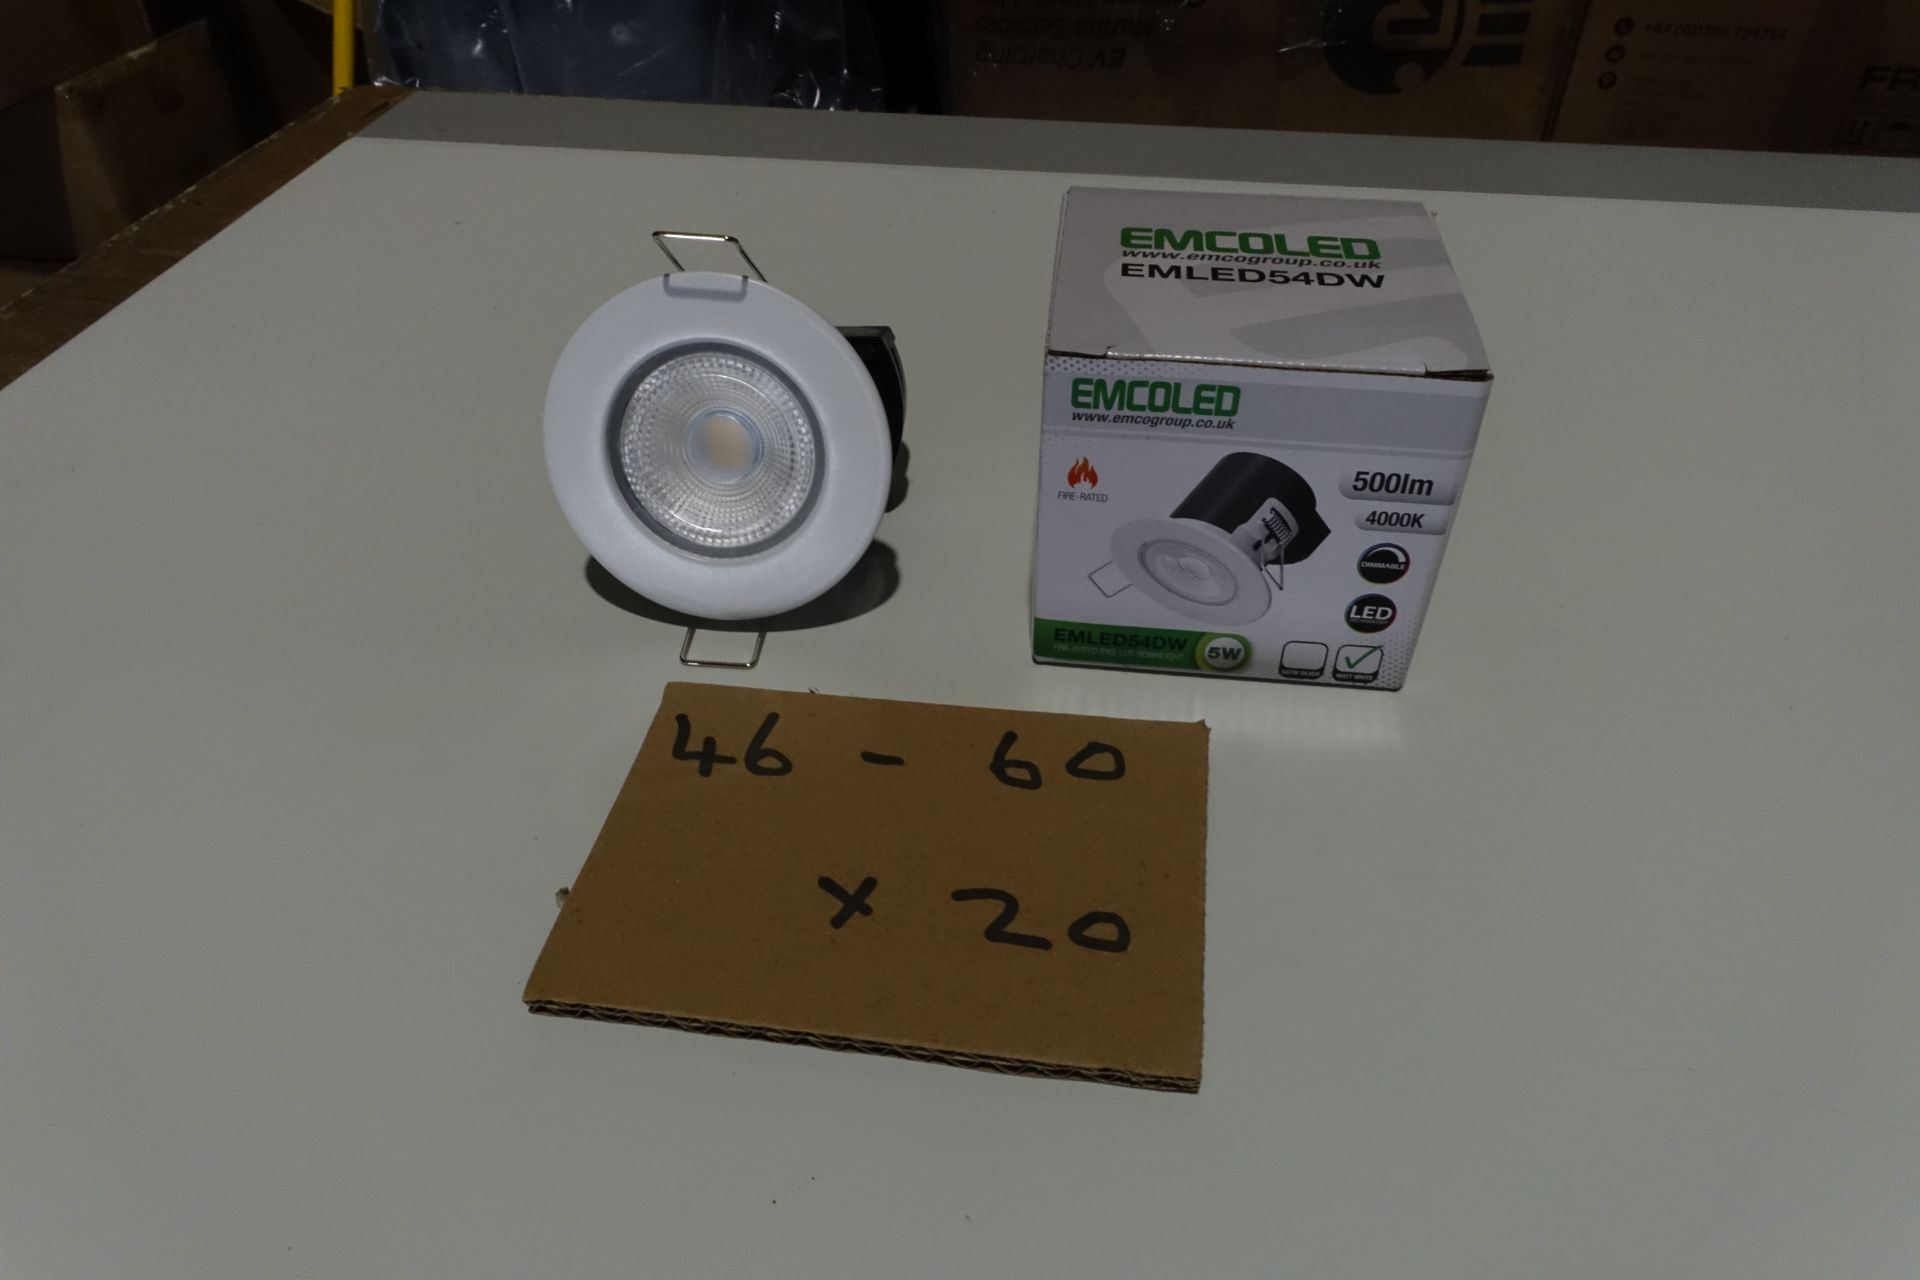 20 x EMCOLED EMLED54DW 5W LED Downlights Dimmable Fire Rated 4000K MATT White Finish